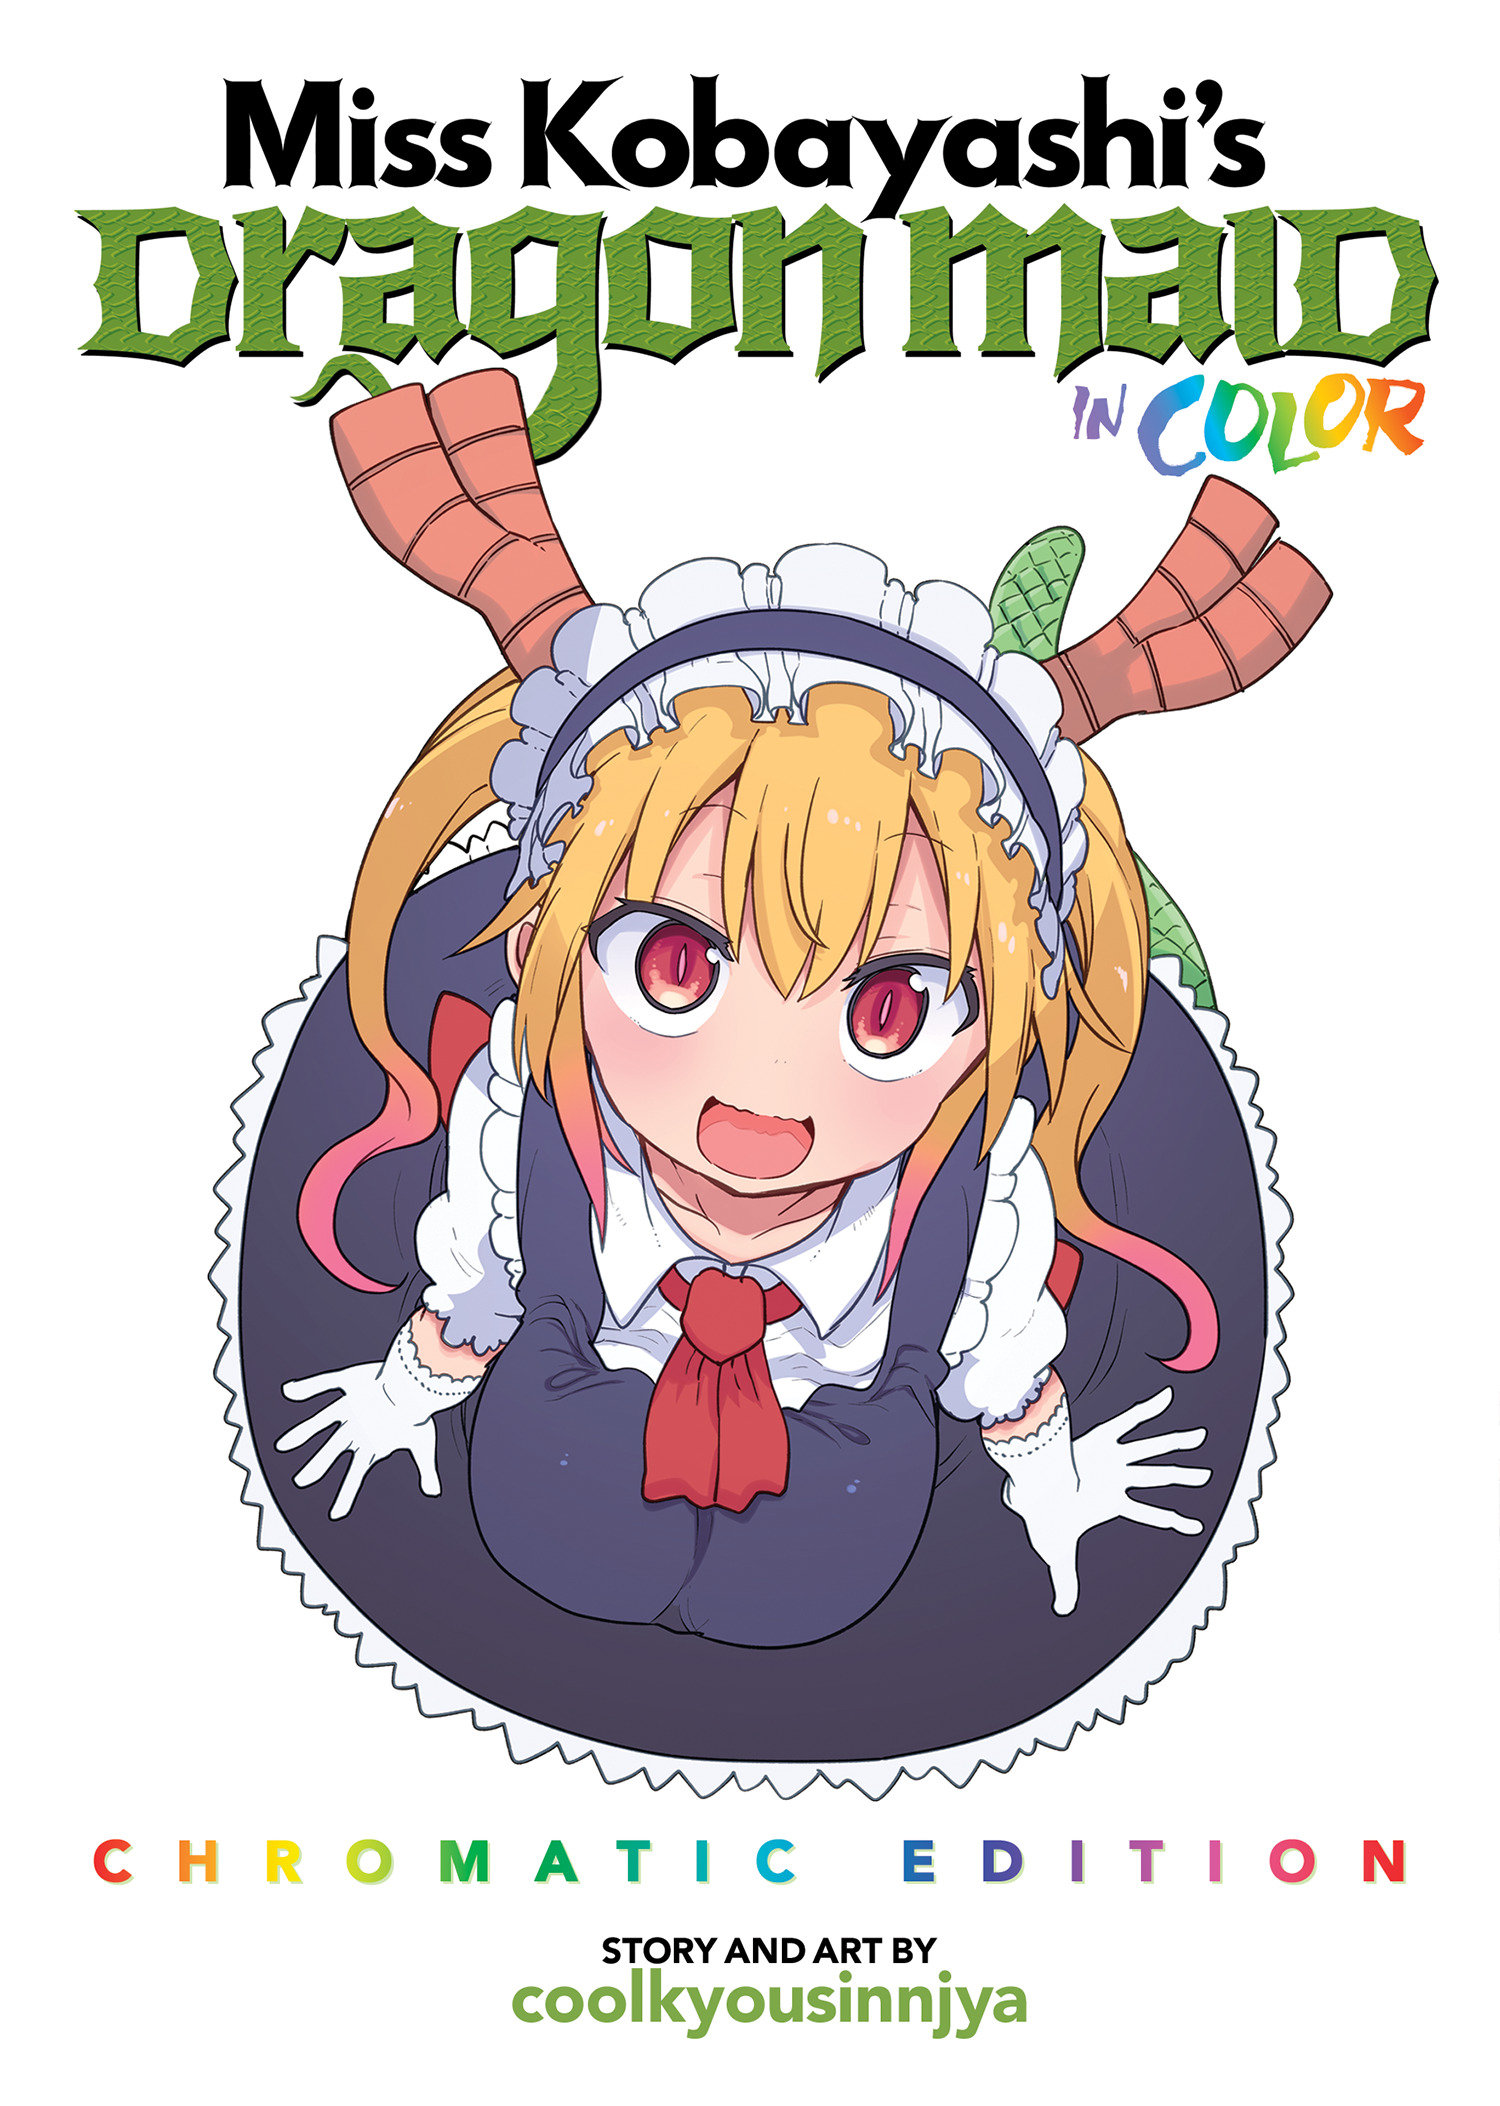 Miss Kobayashi's Dragon Maid In Color! - Double-Chromatic Edition Volume 1